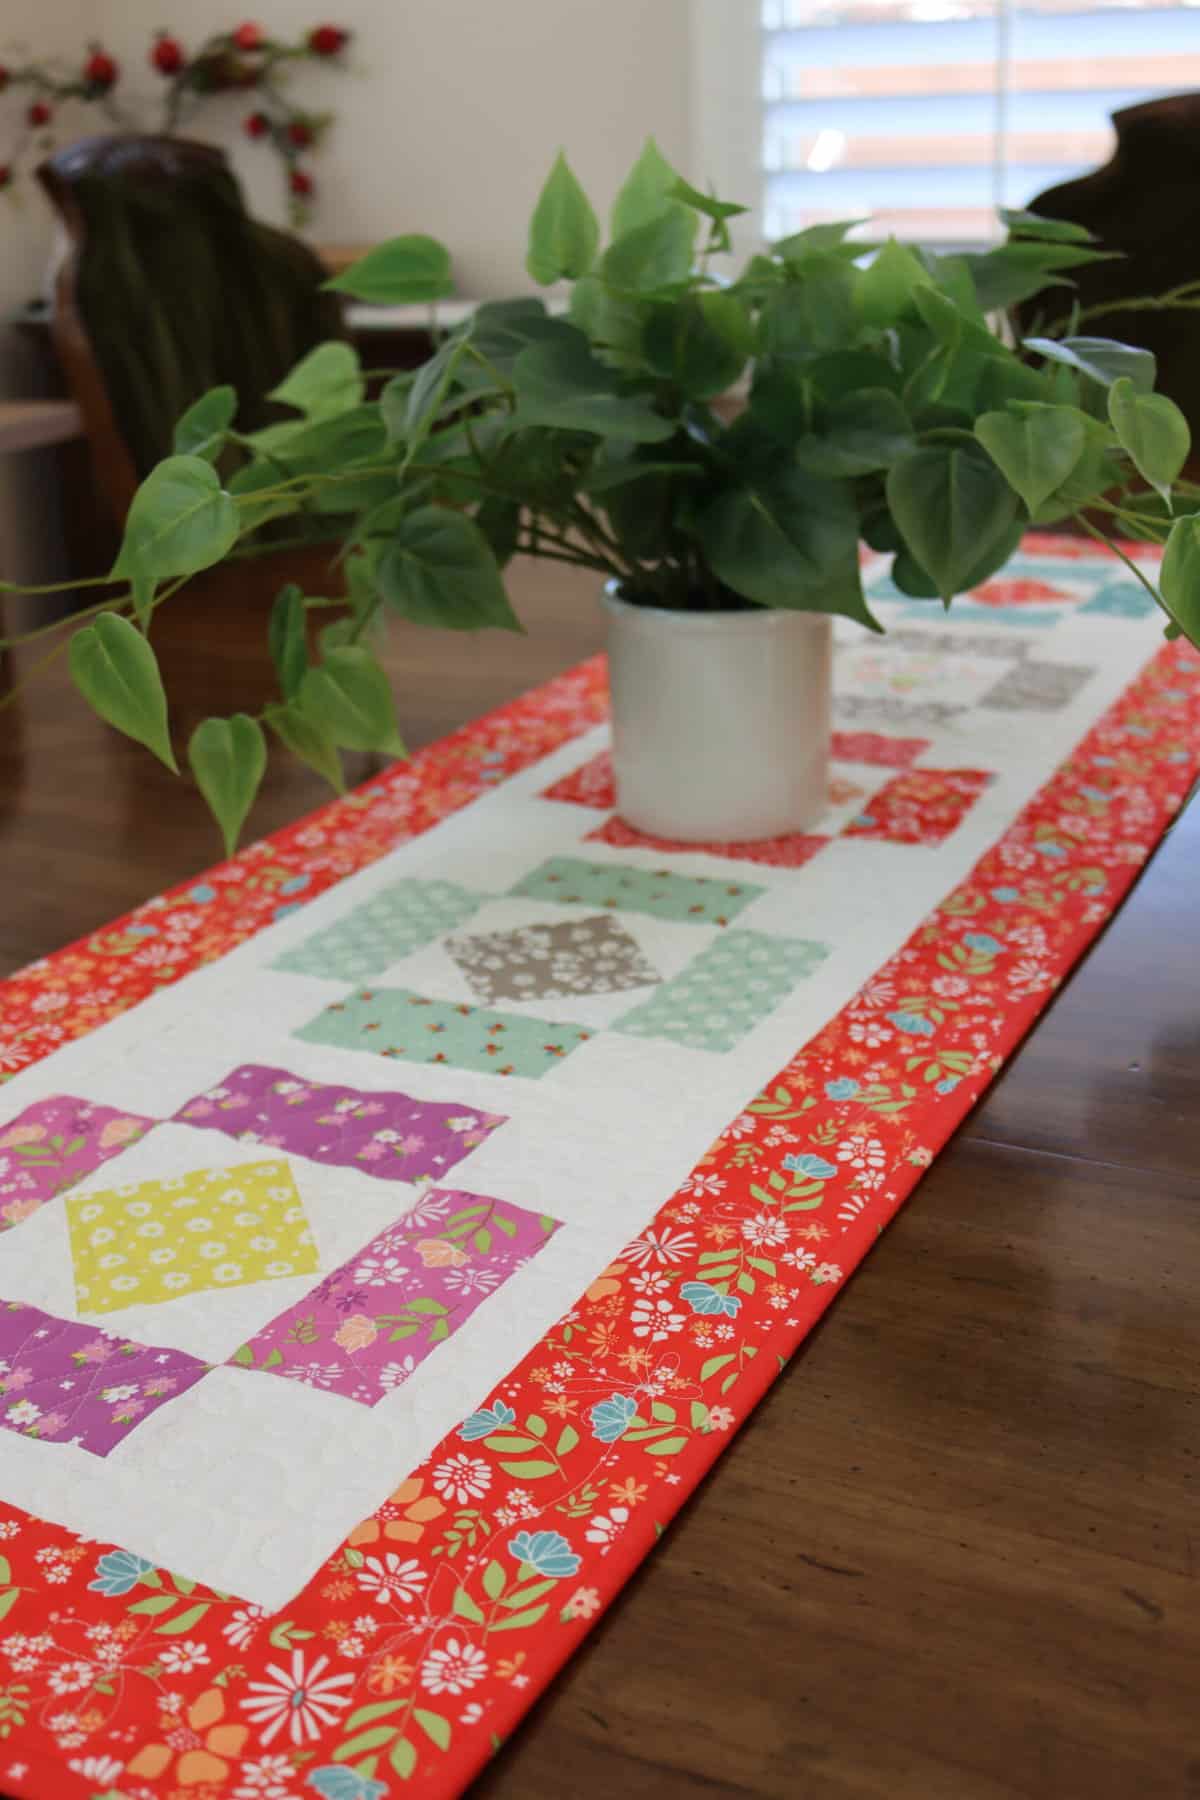 Scrappy quilted table runner with plant on top made by Sherri from A Quilting Life